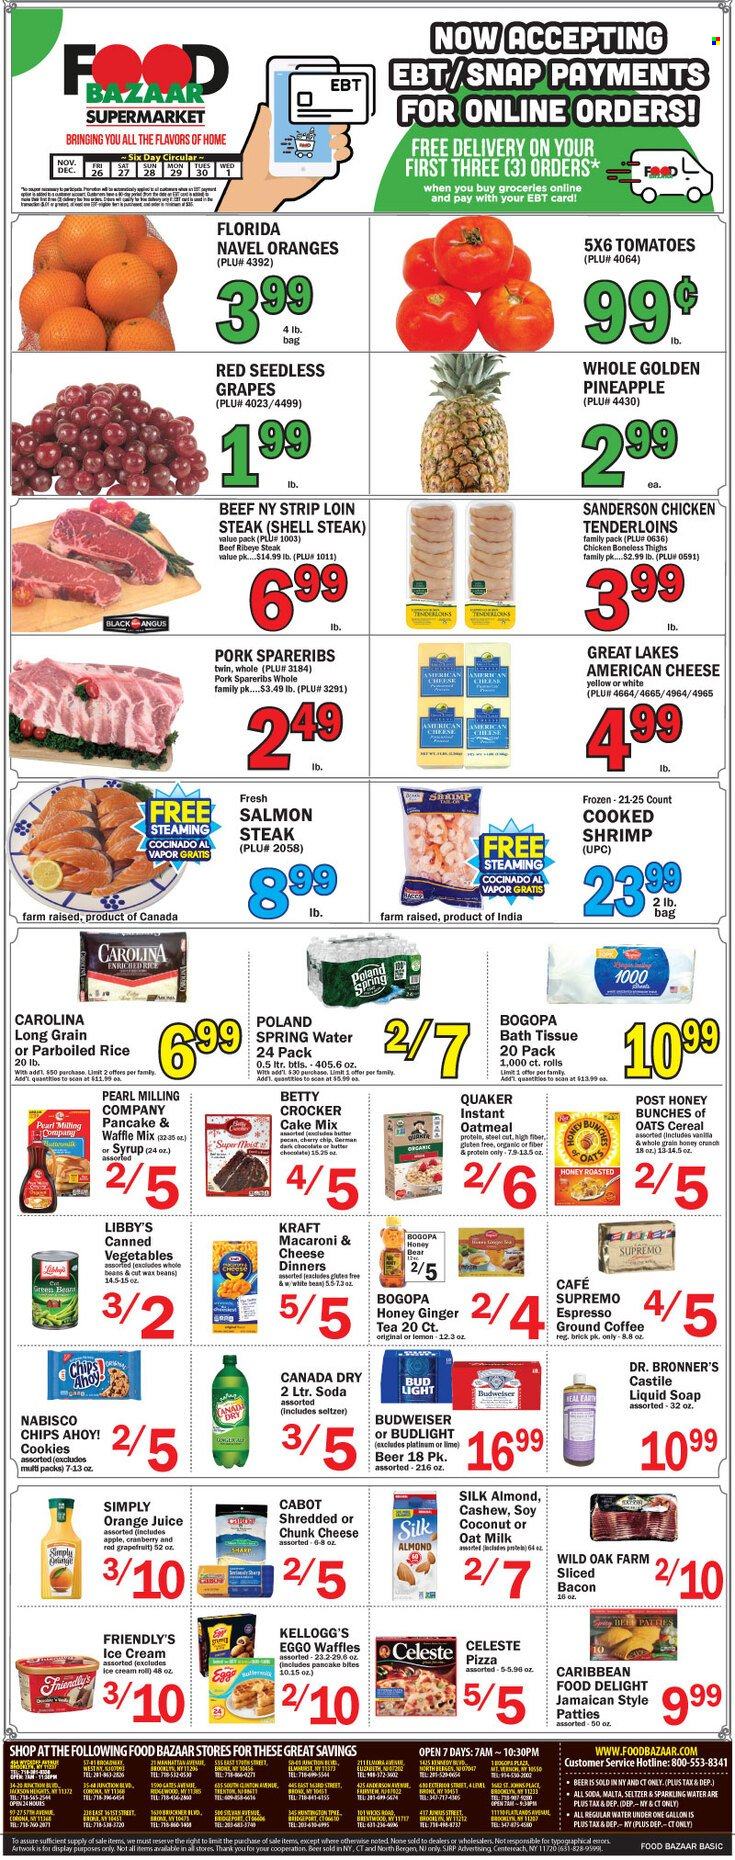 Food Bazaar Flyer - 11/26/2021 - 12/01/2021 - Sales products - seedless grapes, waffles, cake mix, grapefruits, grapes, pineapple, coconut, salmon, shrimps, pizza, pancake, Quaker, Kraft®, bacon, american cheese, chunk cheese, milk, oat milk, butter, ice cream, Friendly's Ice Cream, Celeste, cookies, Kellogg's, Chips Ahoy!, oatmeal, canned vegetables, cereals, rice, parboiled rice, Canada Dry, orange juice, juice, seltzer water, spring water, soda, sparkling water, tea, coffee, ground coffee, red wine, wine, beer, Bud Light, beef meat, beef steak, steak, rib eye, sirloin steak, ribeye steak, pork spare ribs, Budweiser, navel oranges. Page 1.